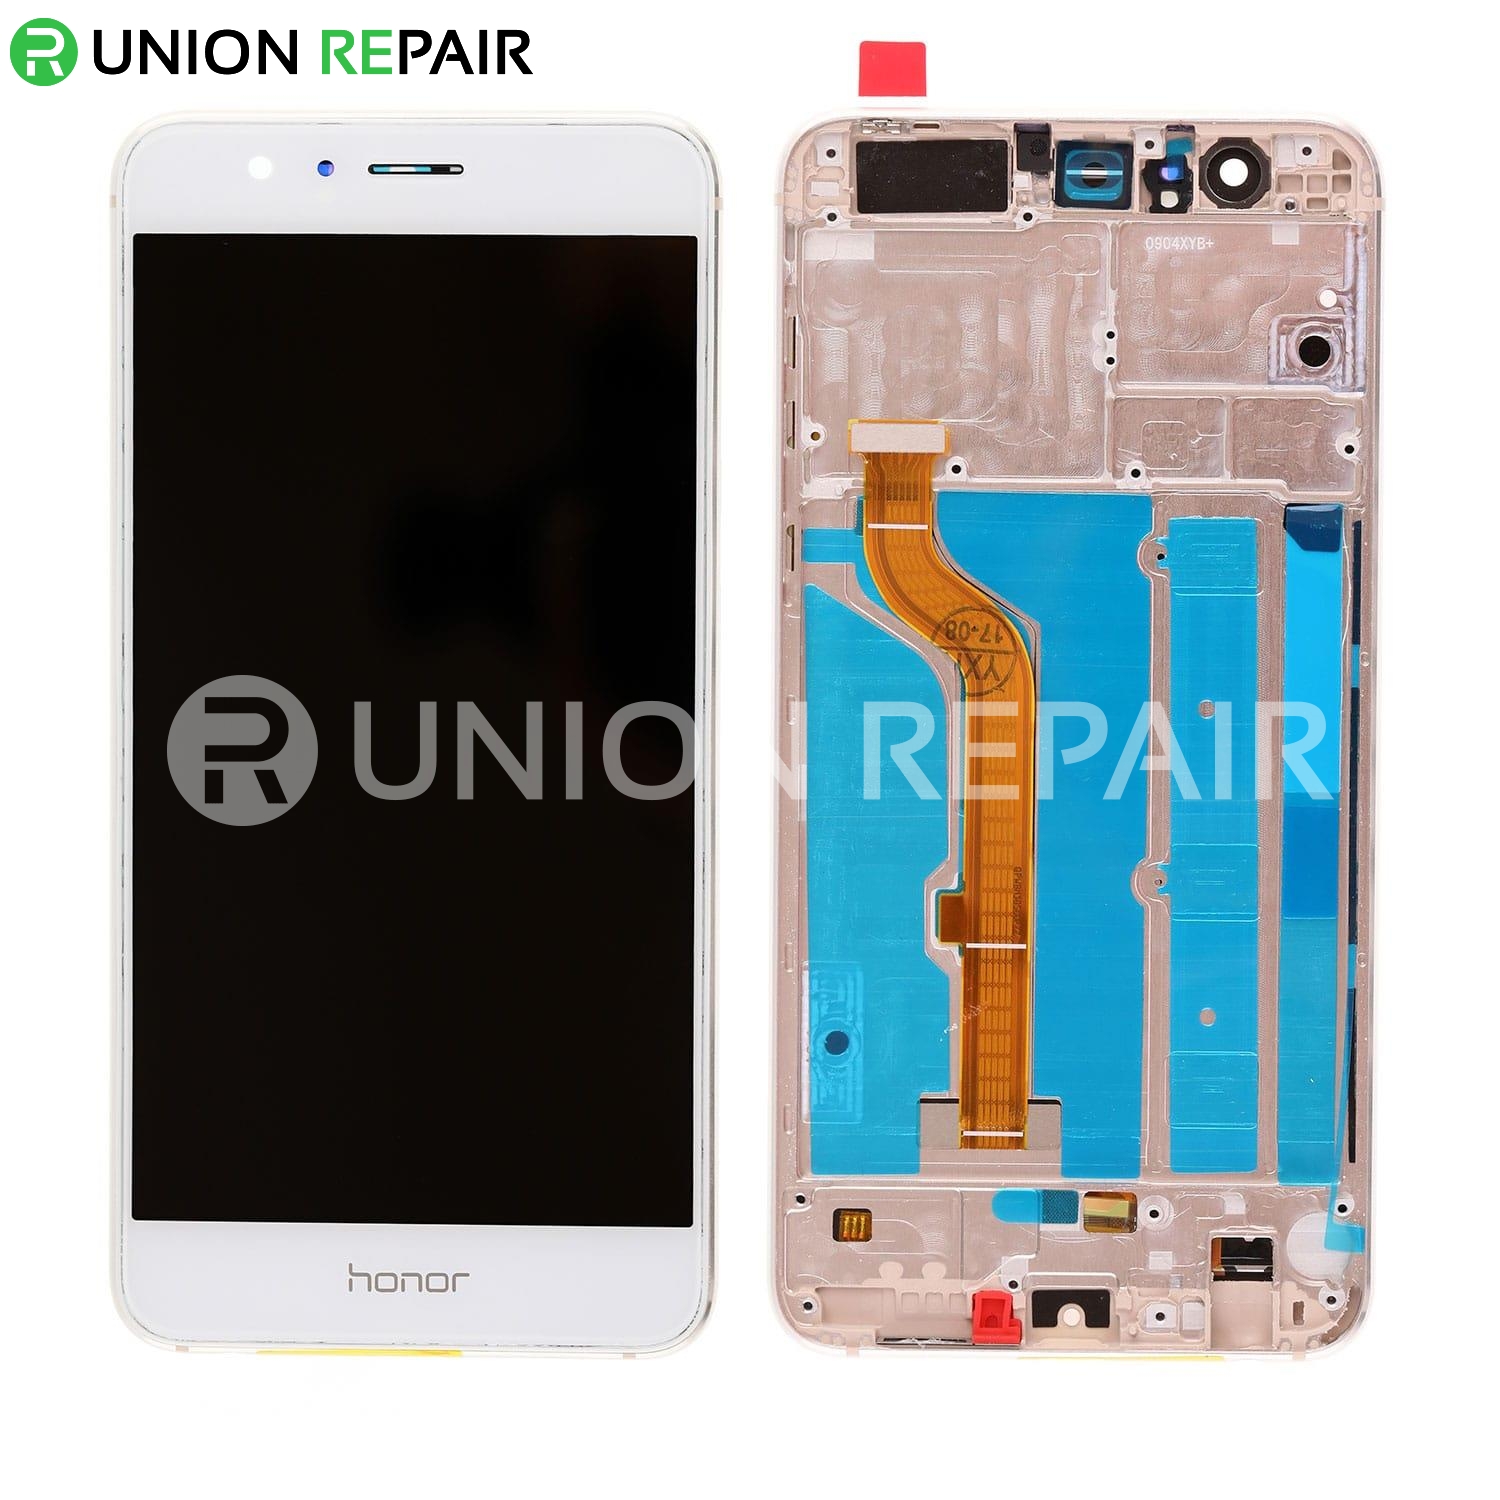 Replacement for Huawei Honor 8 LCD Screen Digitizer with Frame - White